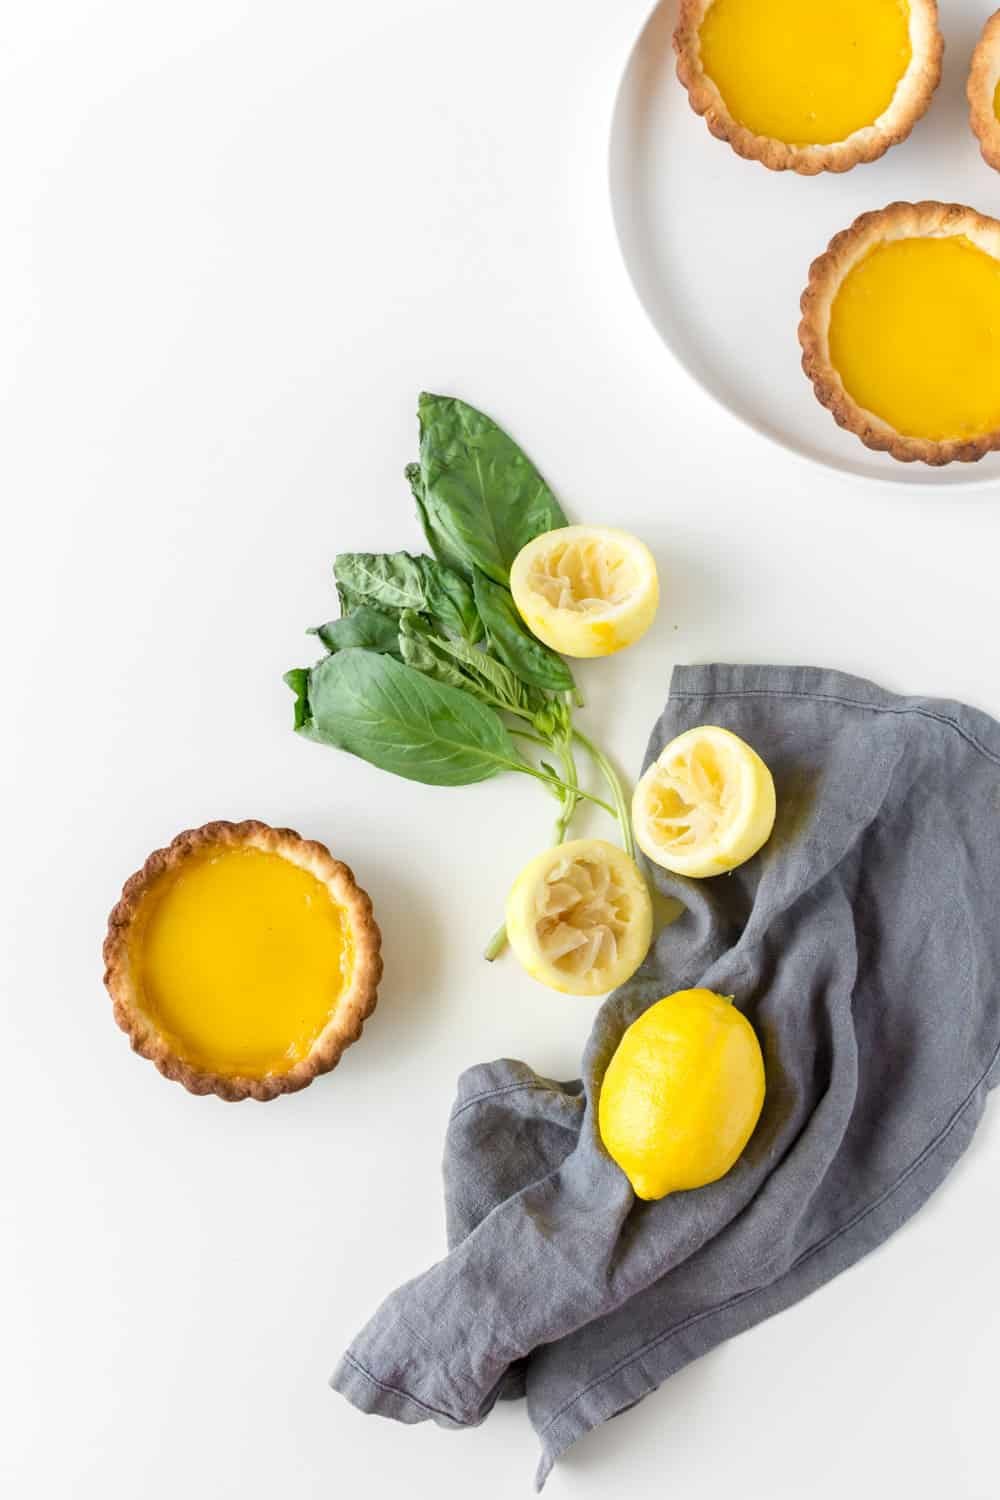 Overhead view of lemon custard tart against a white marble backdrop, with basil leaves, lemons and a grey napkin.